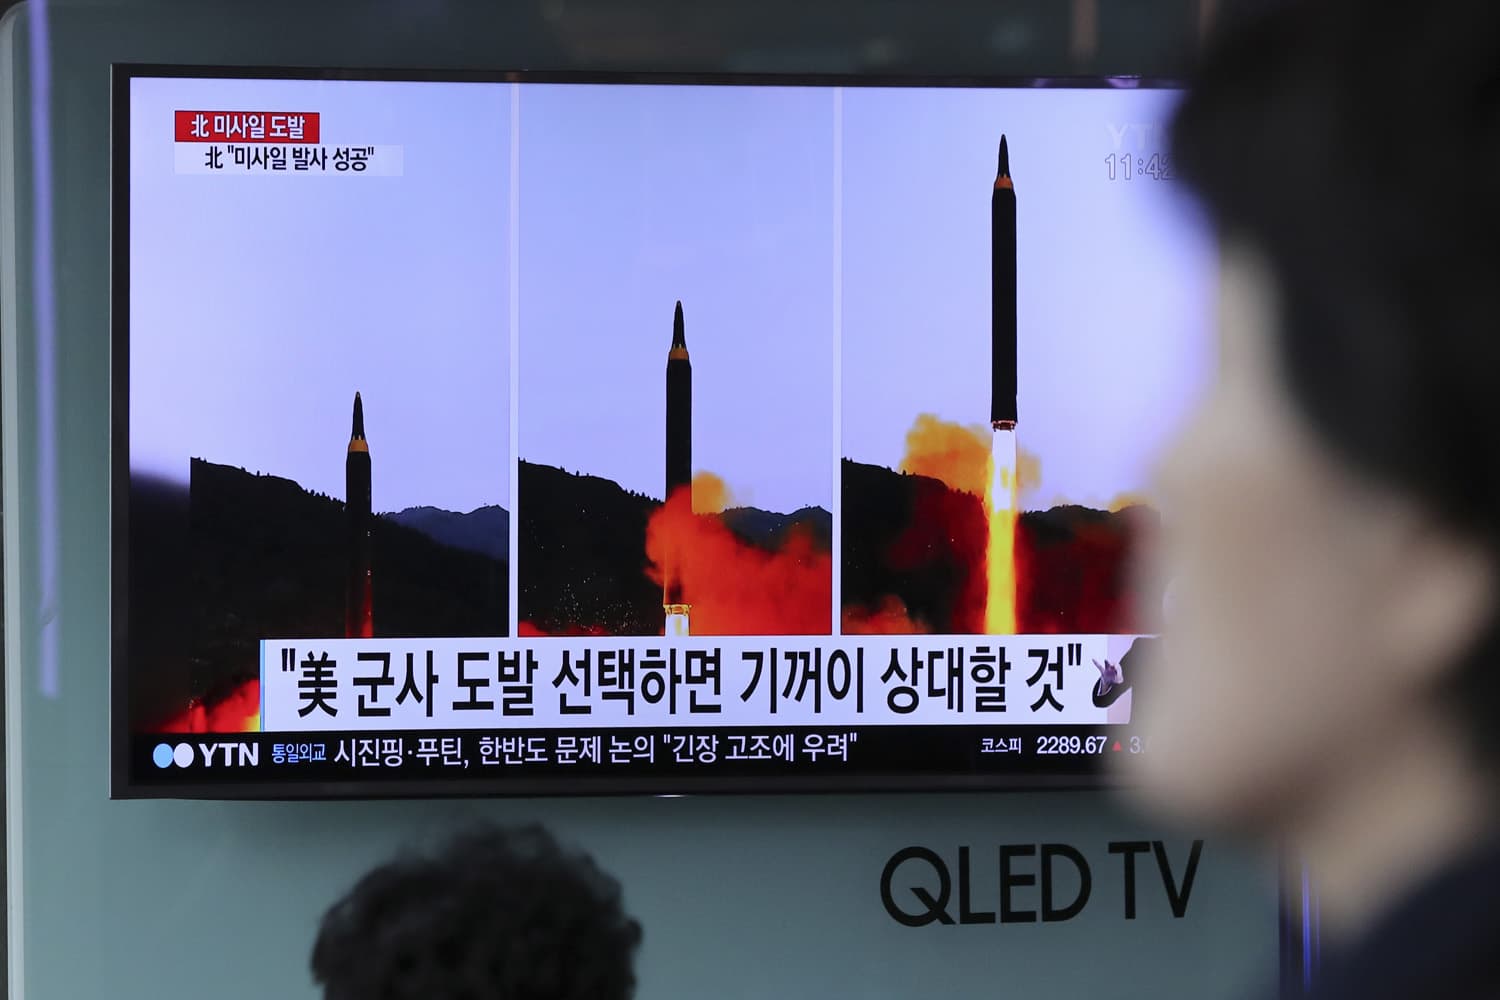 A woman walks by a TV news program showing images of North Korean missile launch, published in the country's Rodong Sinmun newspaper, at Seoul Railway station in Seoul, South Korea, Monday, May 15, 2017. (Lee Jin-man/AP)